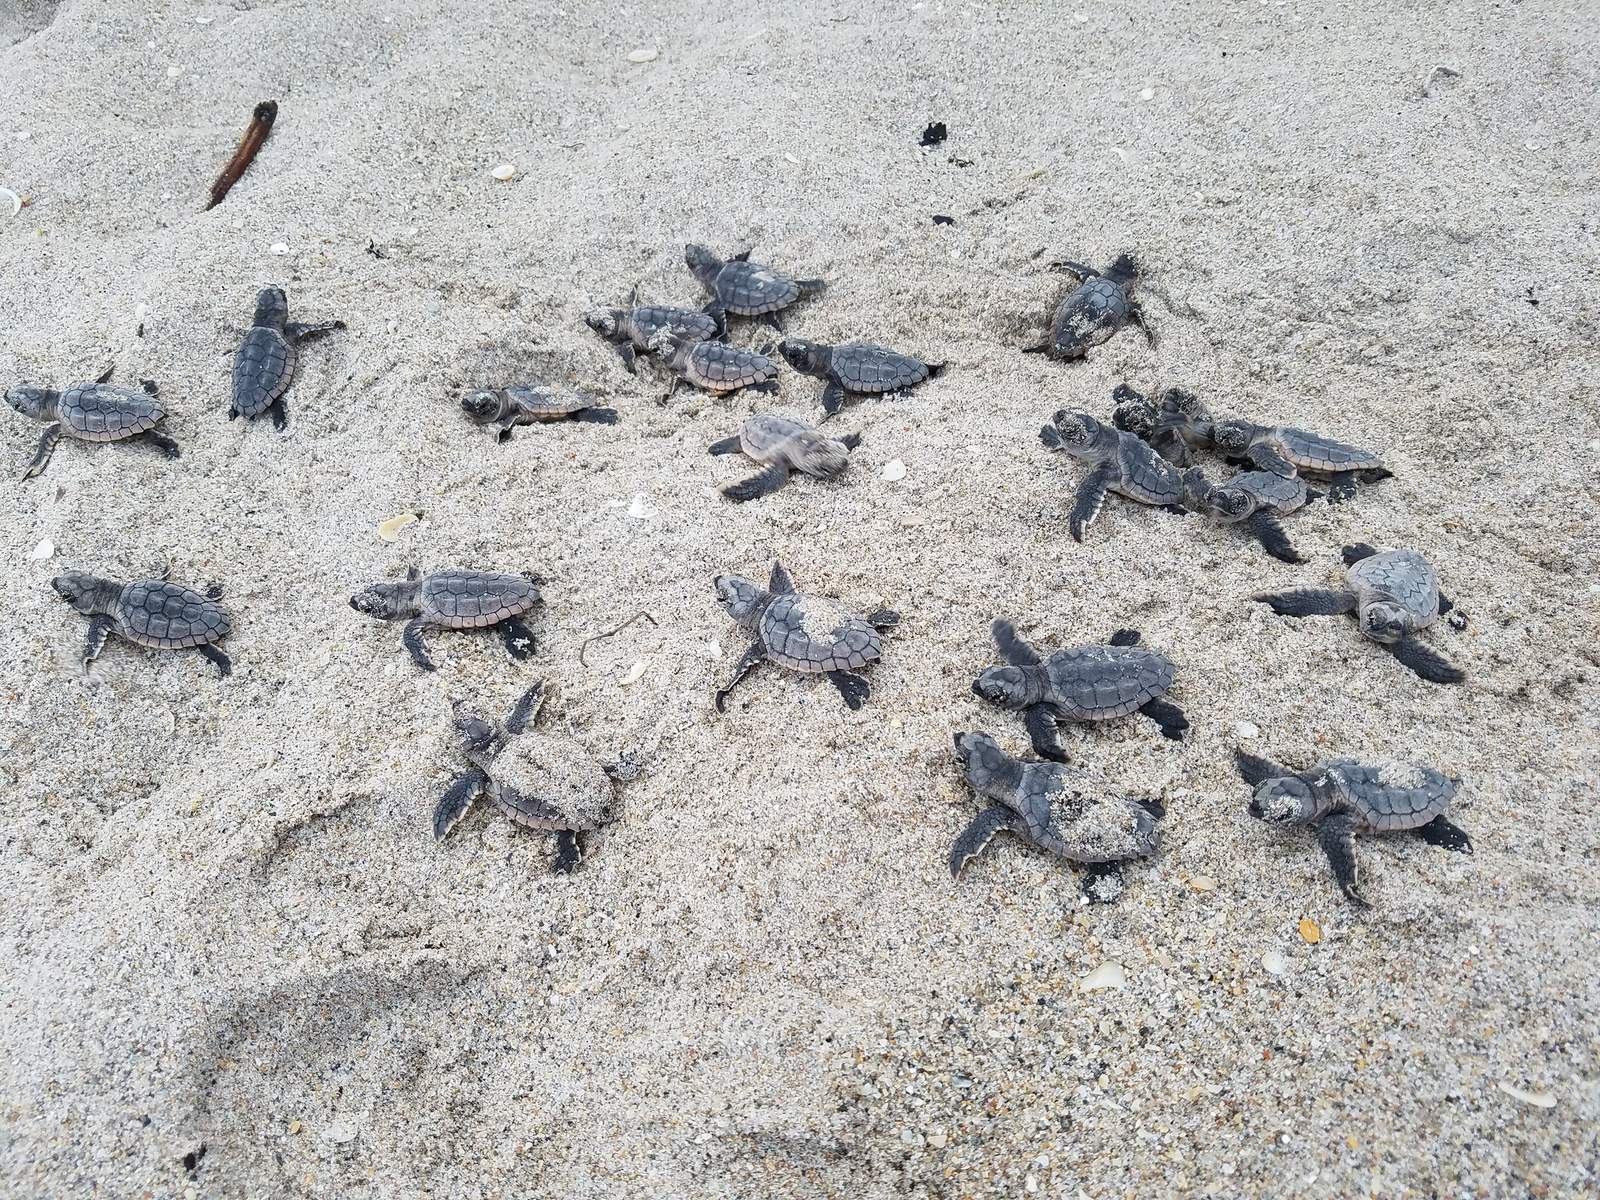 Florida wildlife crews want you to help sea turtles survive: Heres how